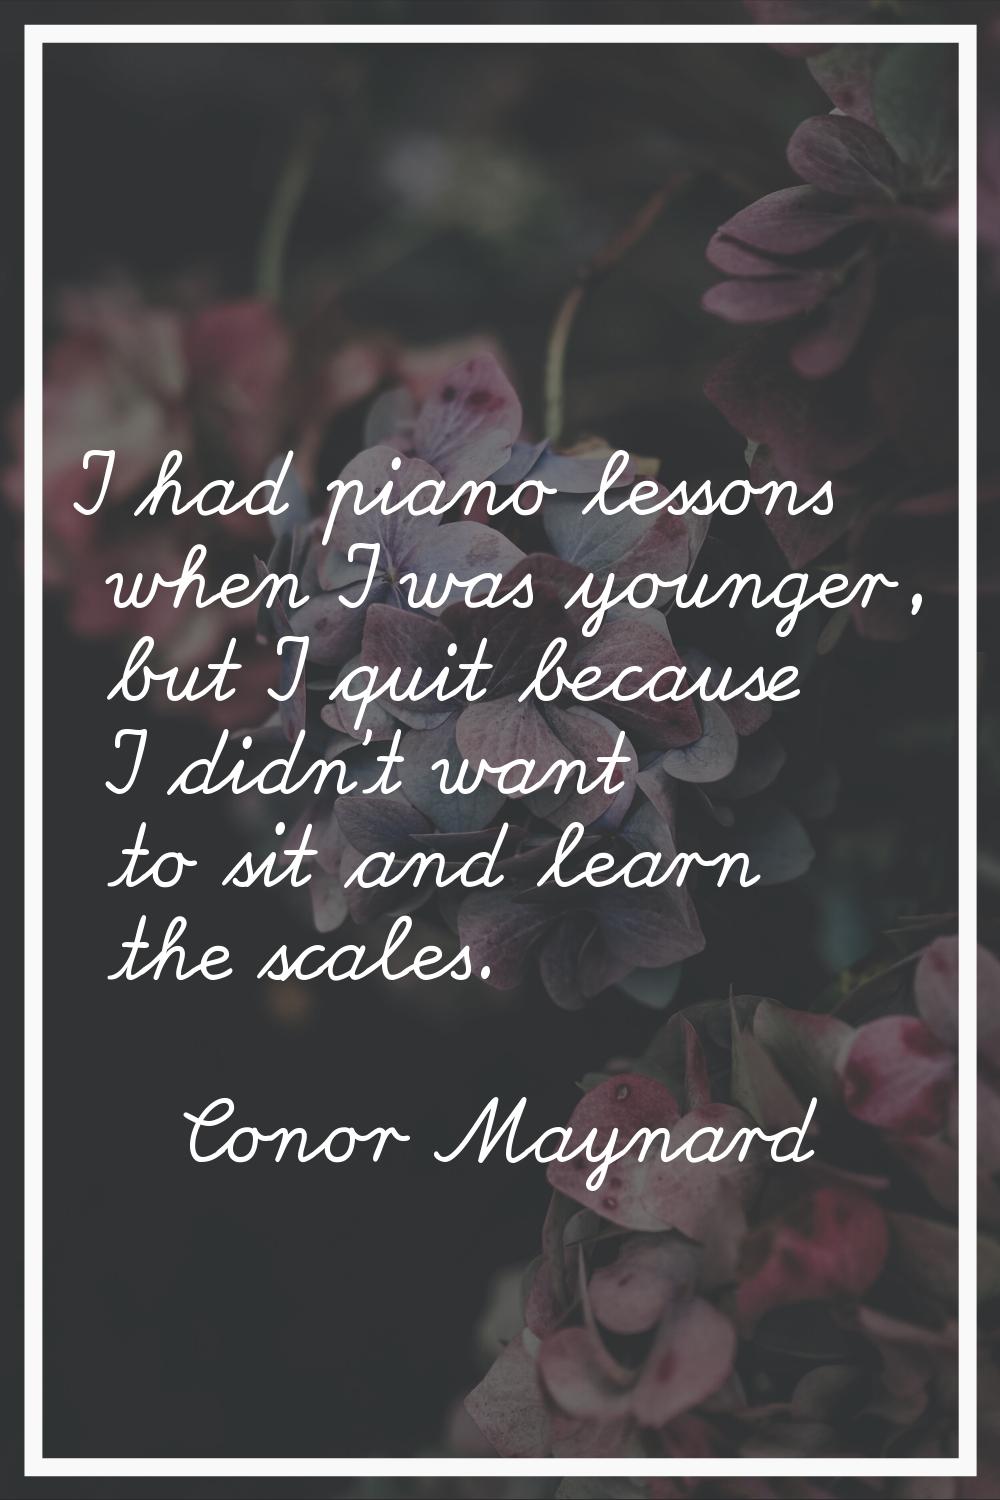 I had piano lessons when I was younger, but I quit because I didn't want to sit and learn the scale